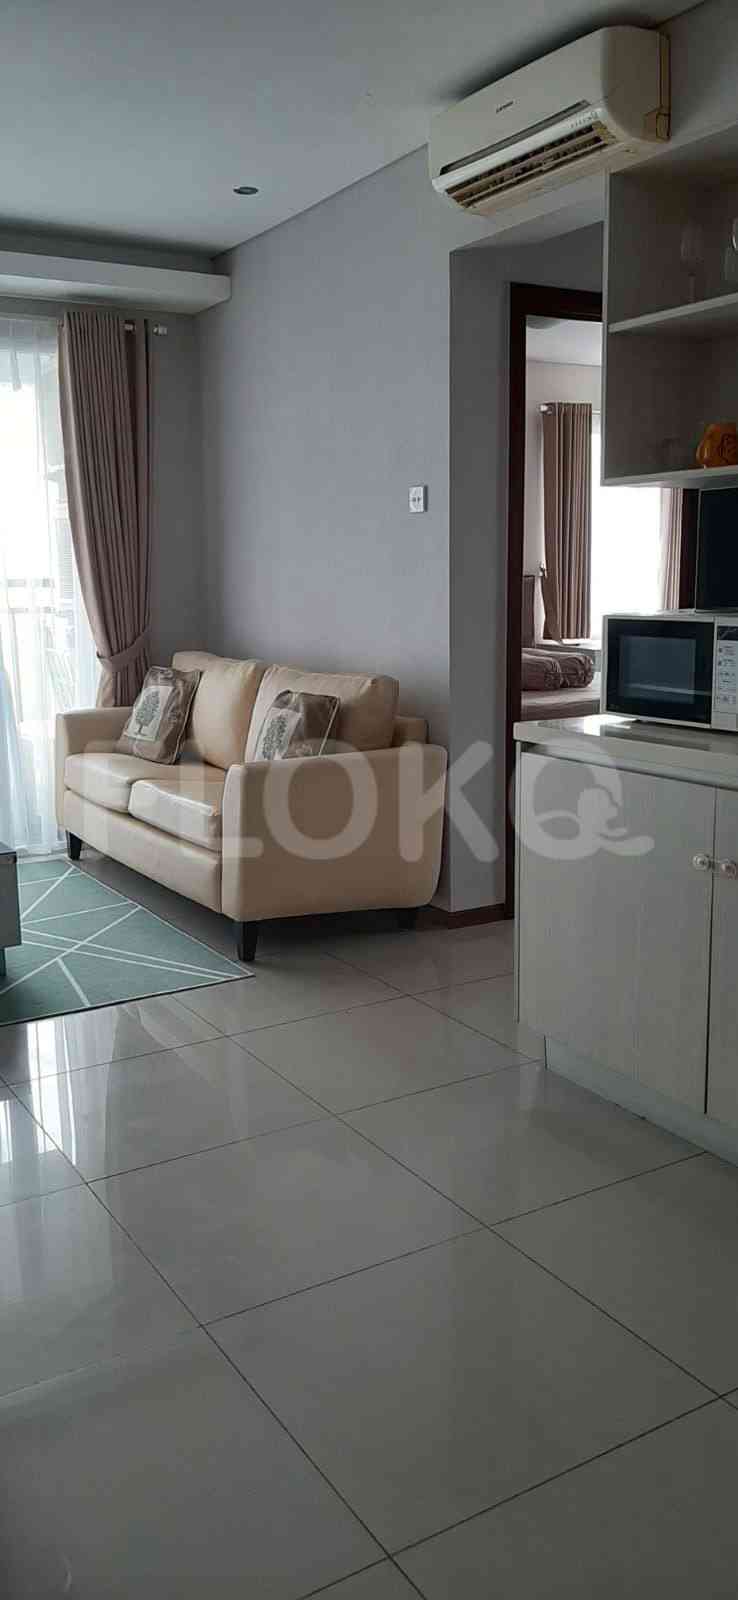 2 Bedroom on 16th Floor for Rent in Thamrin Executive Residence - fth4fc 8